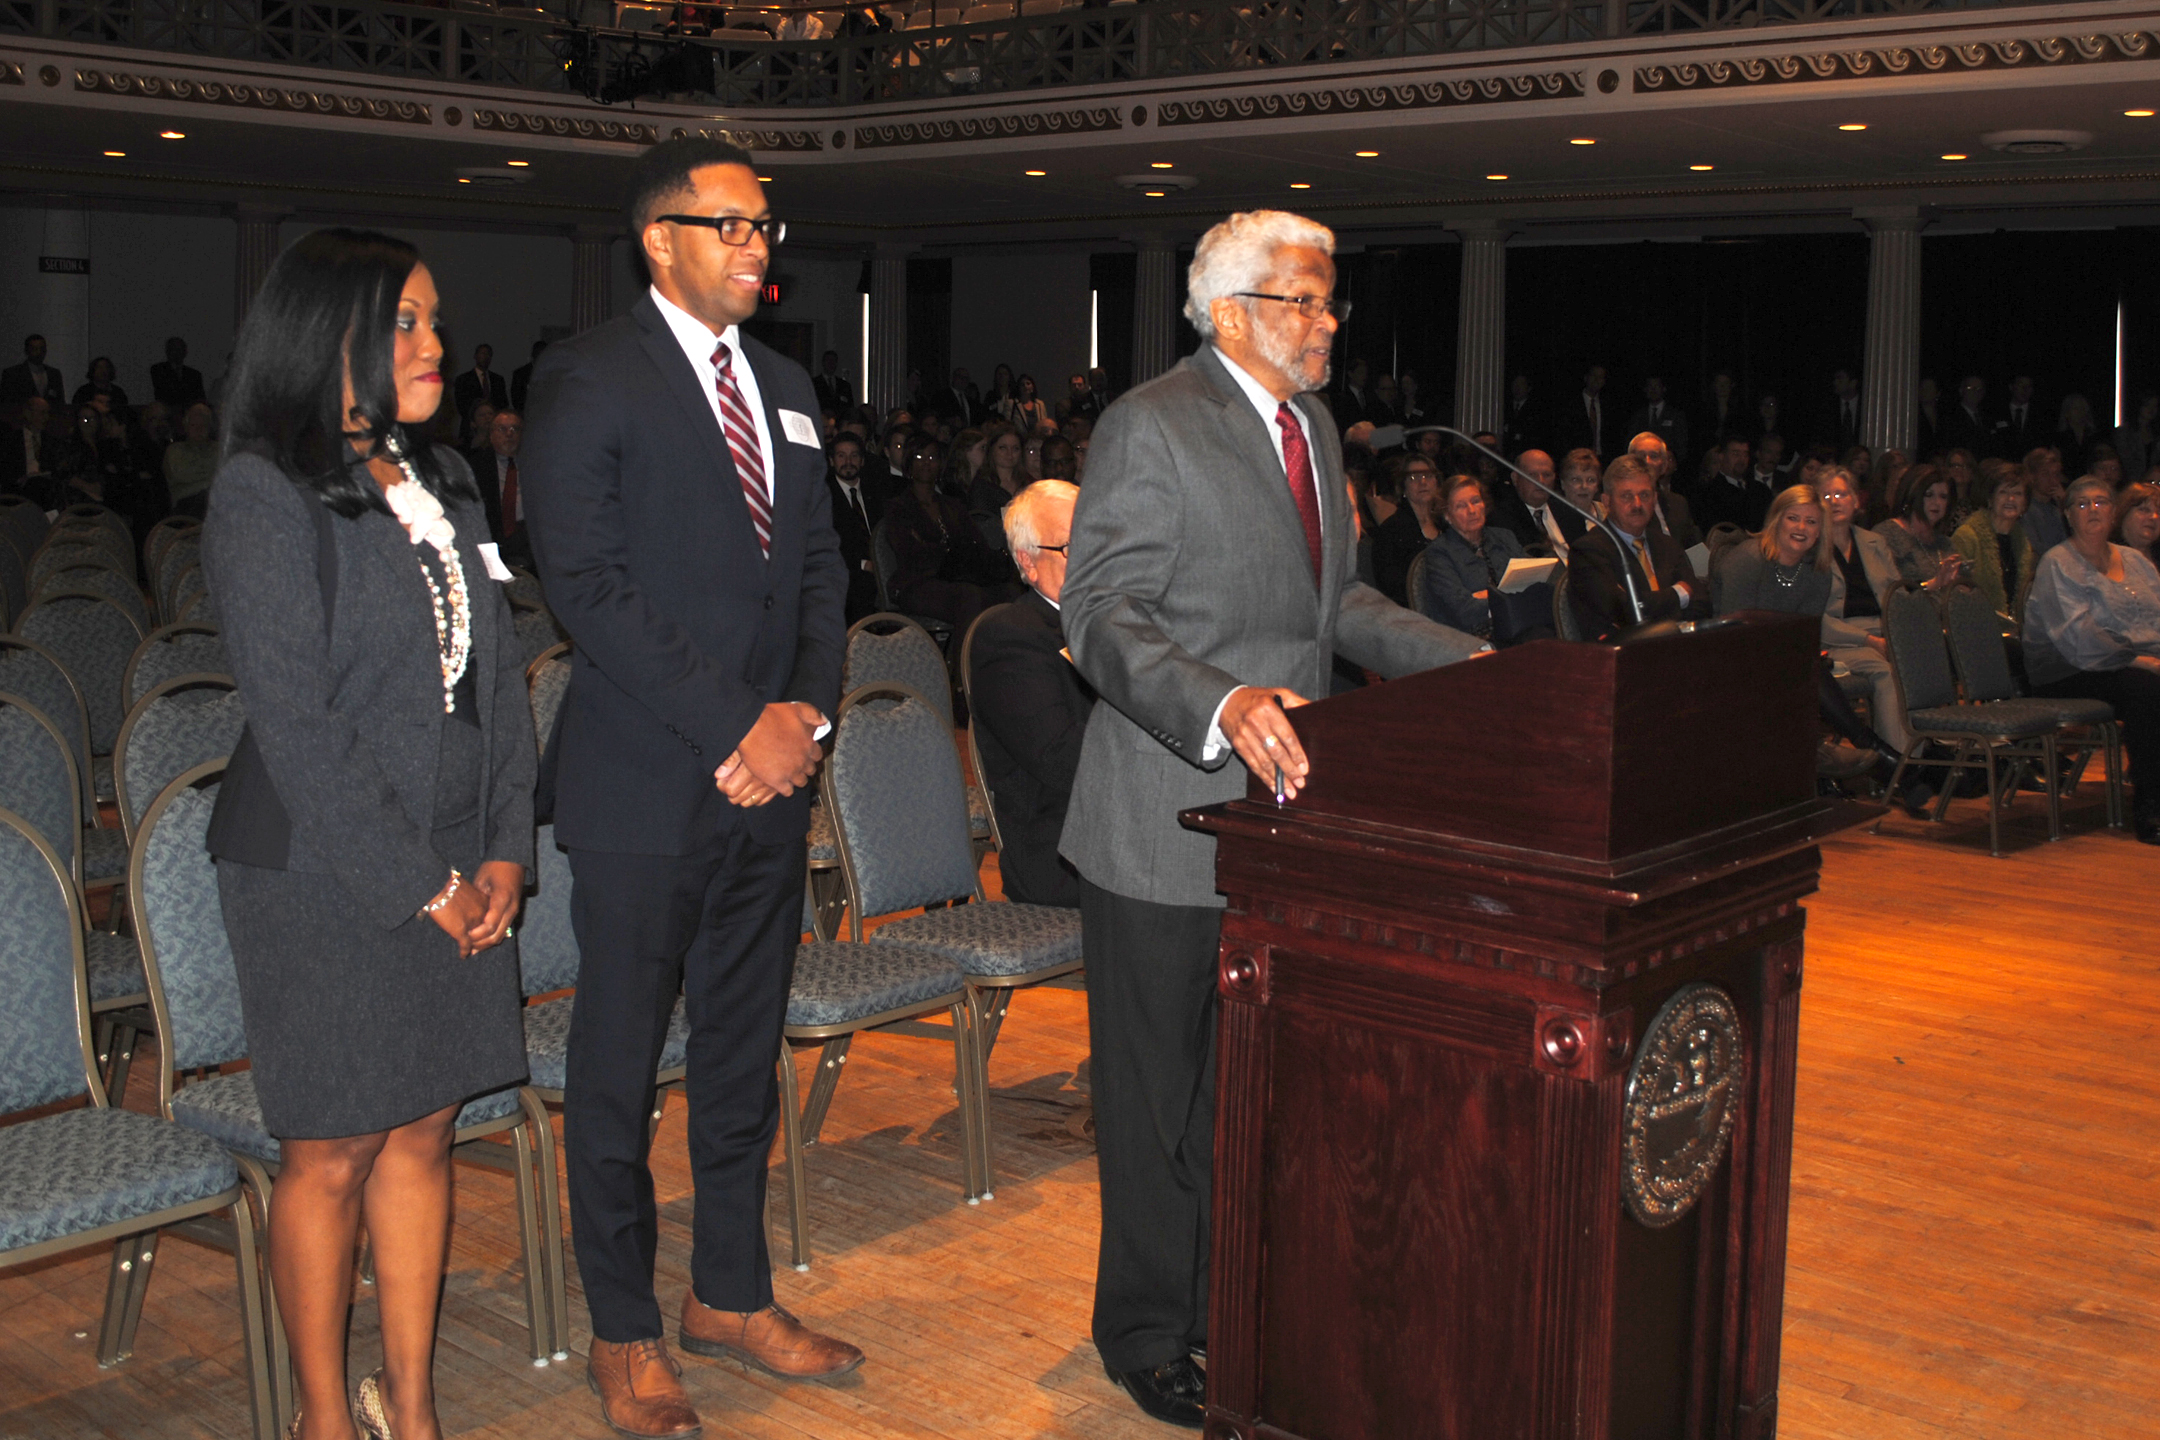 Court of Appeals Judge Richard Dinkins presents two candidates to the Supreme Court.